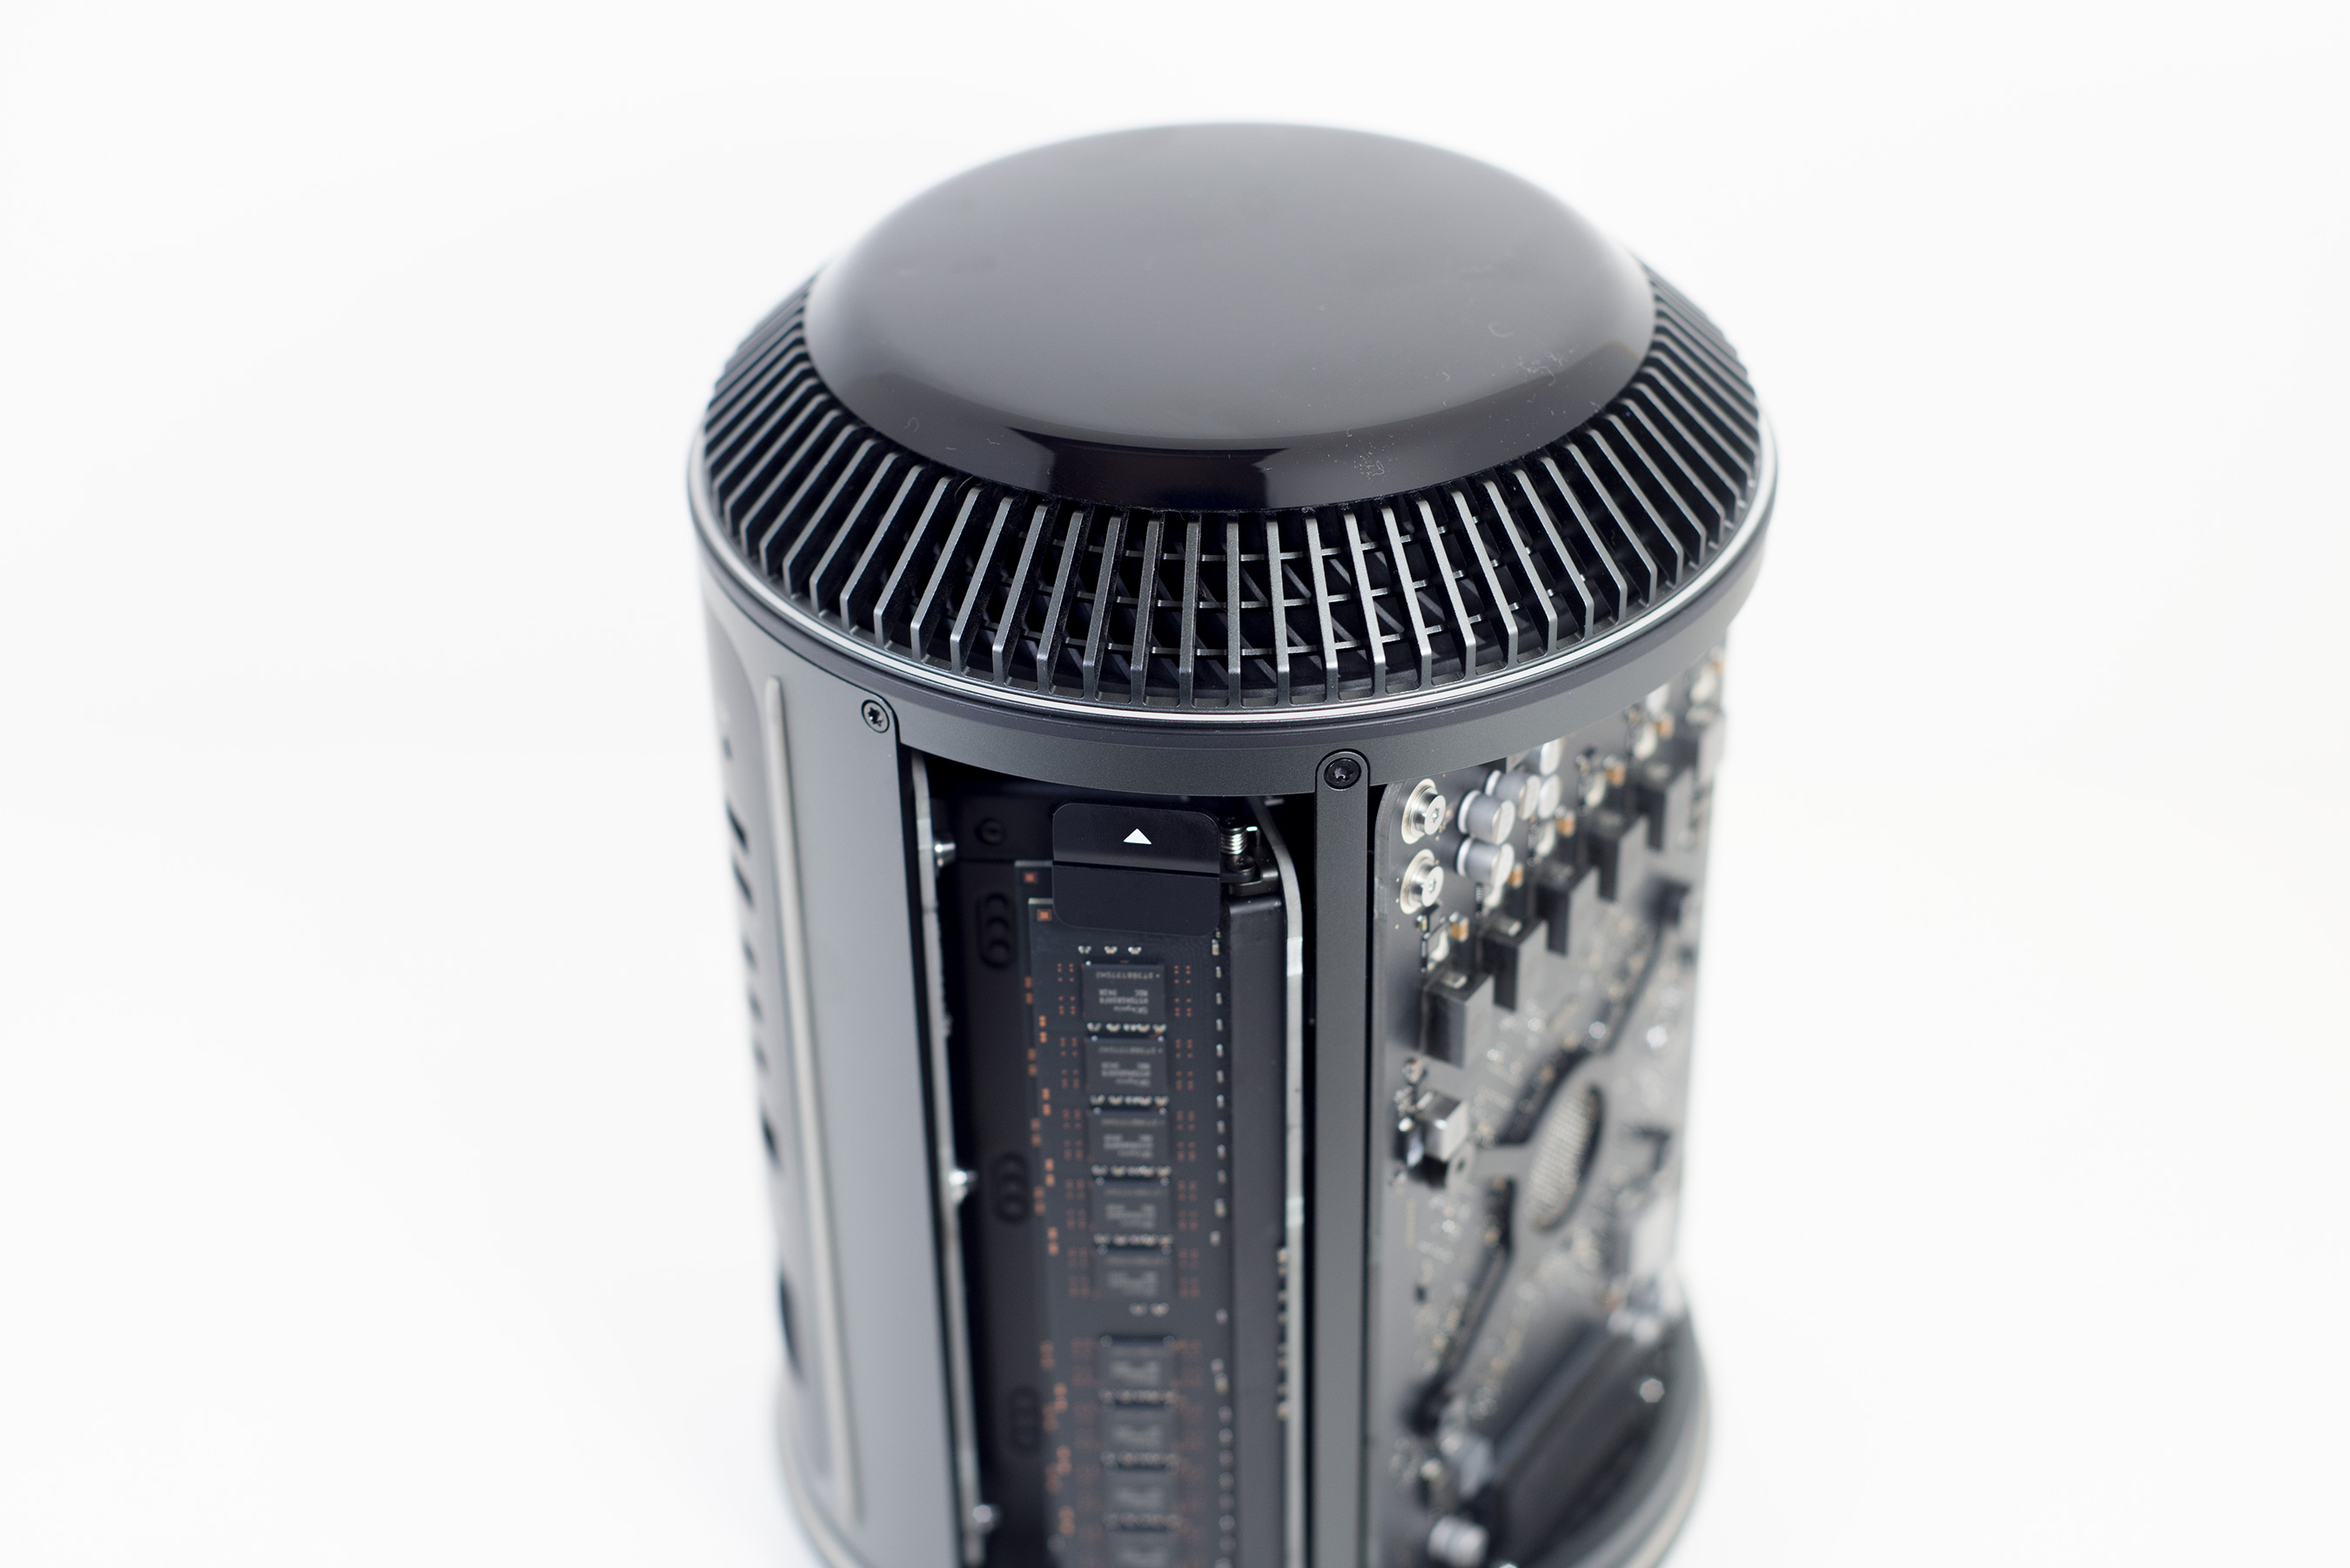 Power Consumption & Noise - The Mac Pro Review (Late 2013)